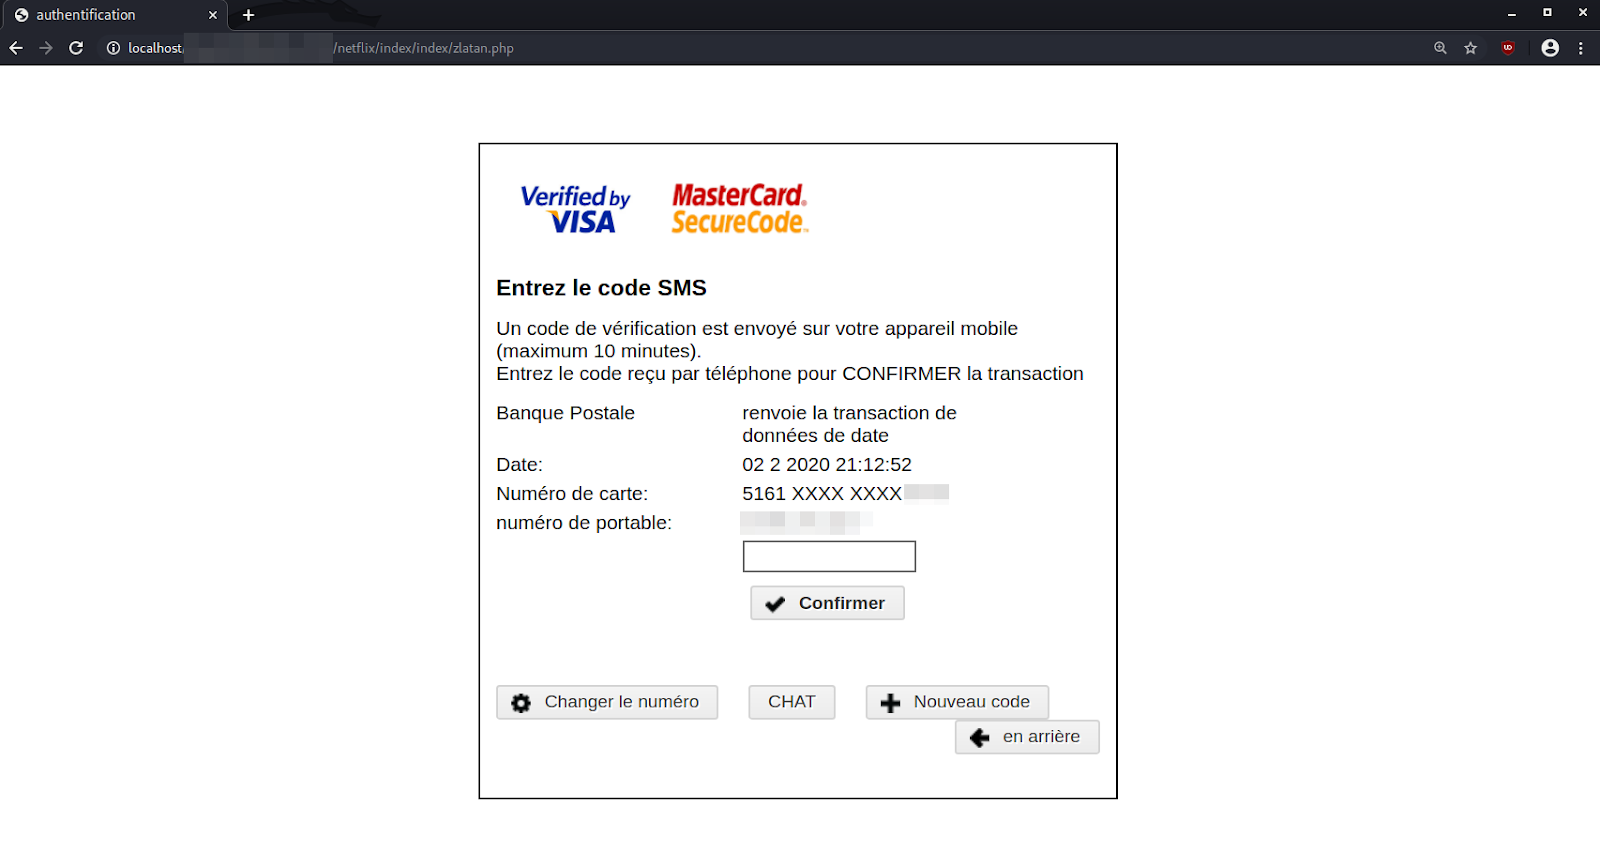 Mastercard - Second Step in Phishing Campaign